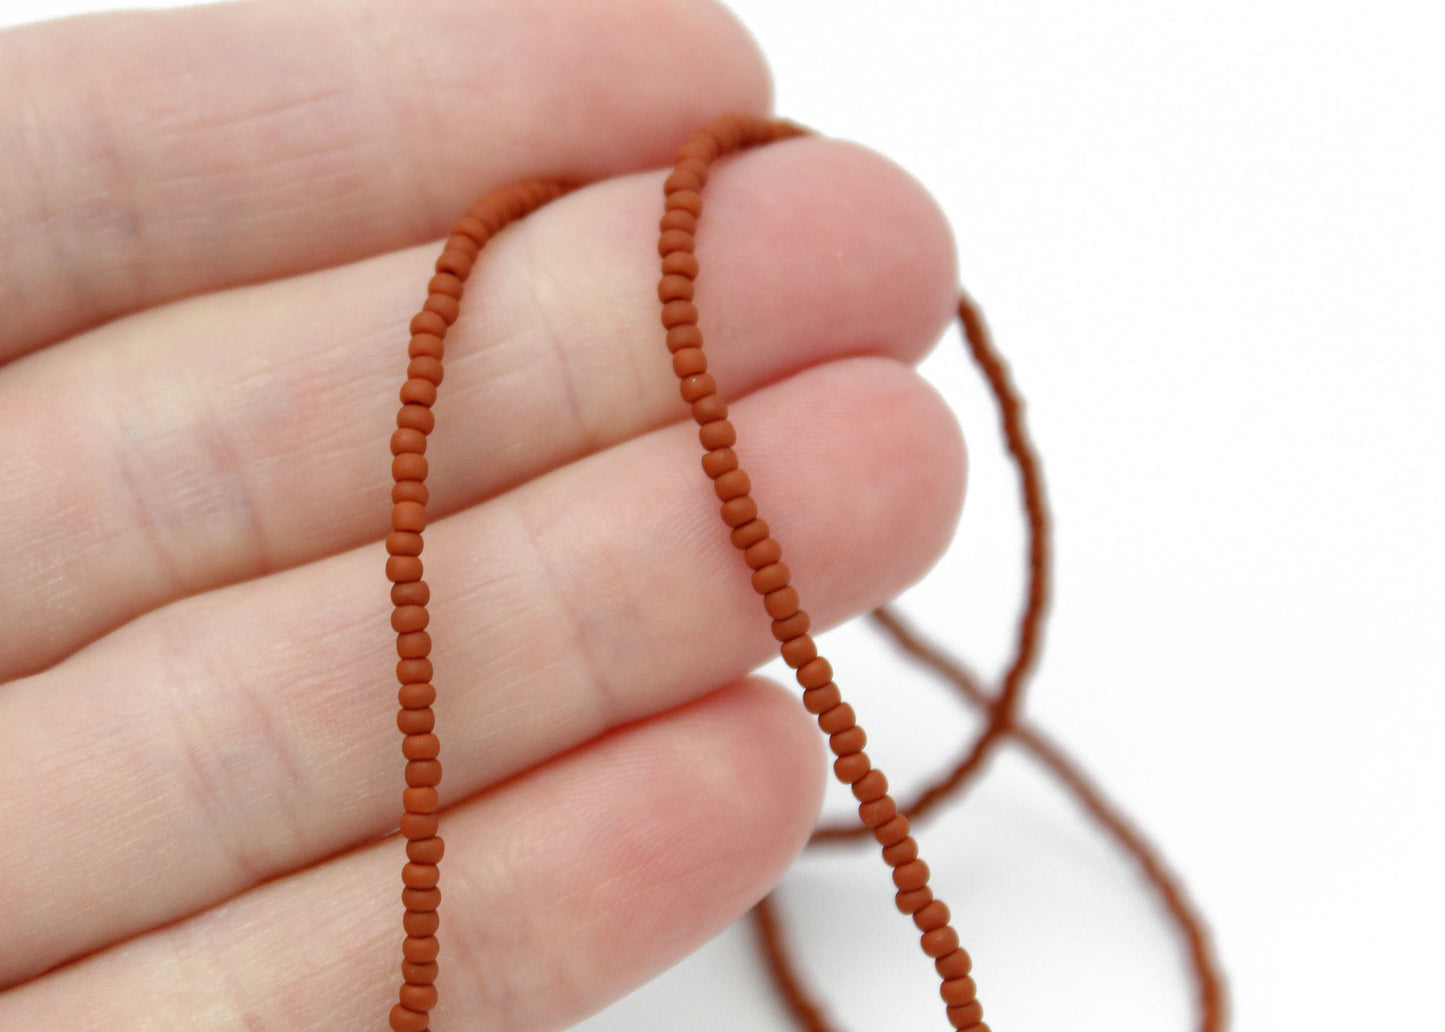 Brown Seed Bead Necklace, Matte Terra Cotta Brown, Single Strand